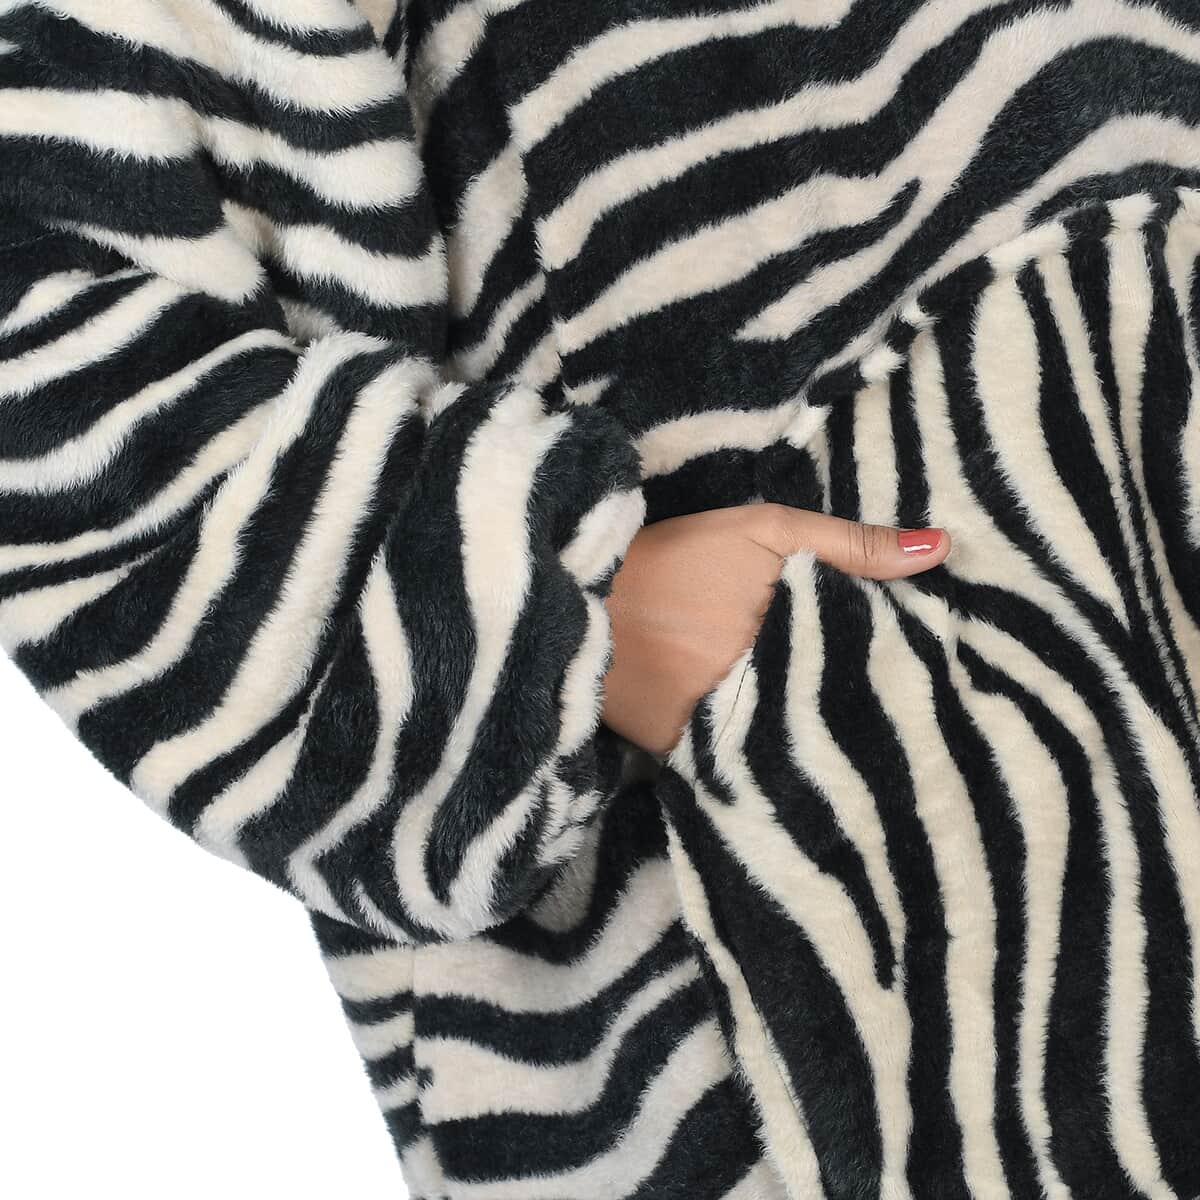 Black and White Zebra Print Sherpa Wearable Blanket with Hood (One Size Fits Most, 100% Polyester) image number 4